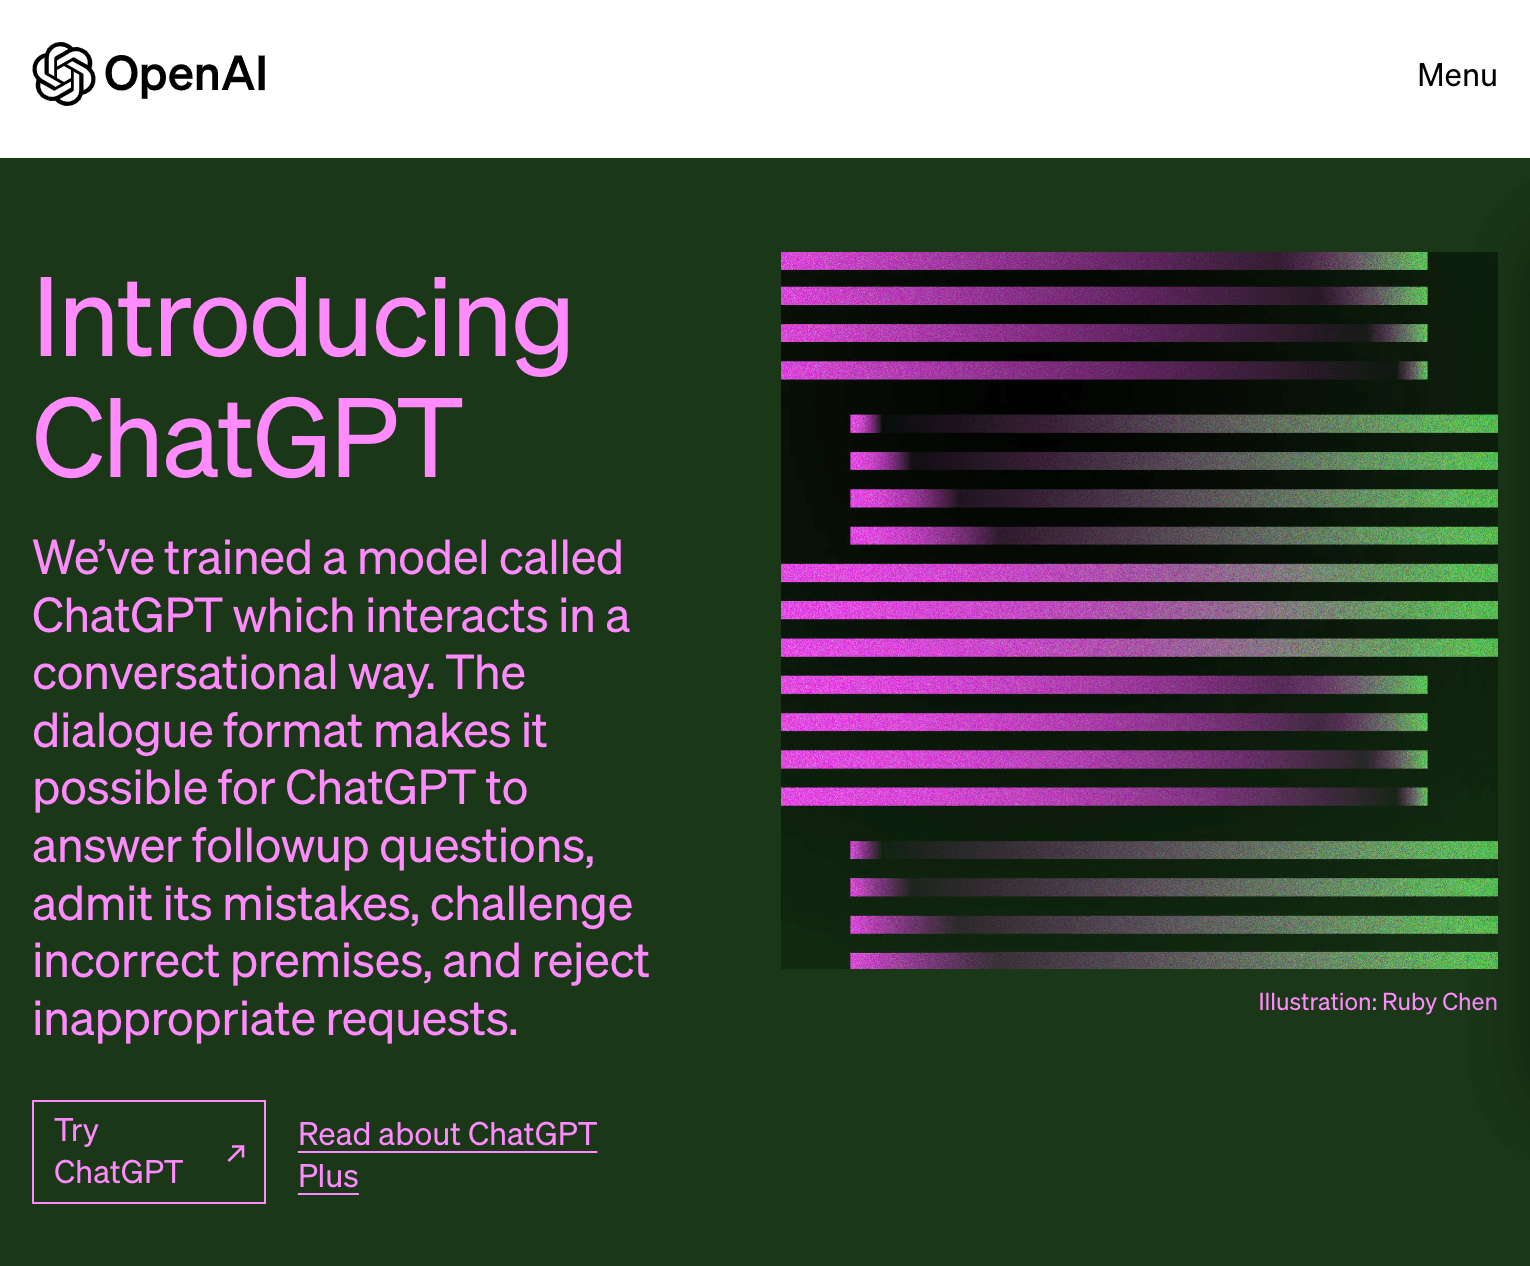 Homepage for ChatGPT featuring a purple bar design